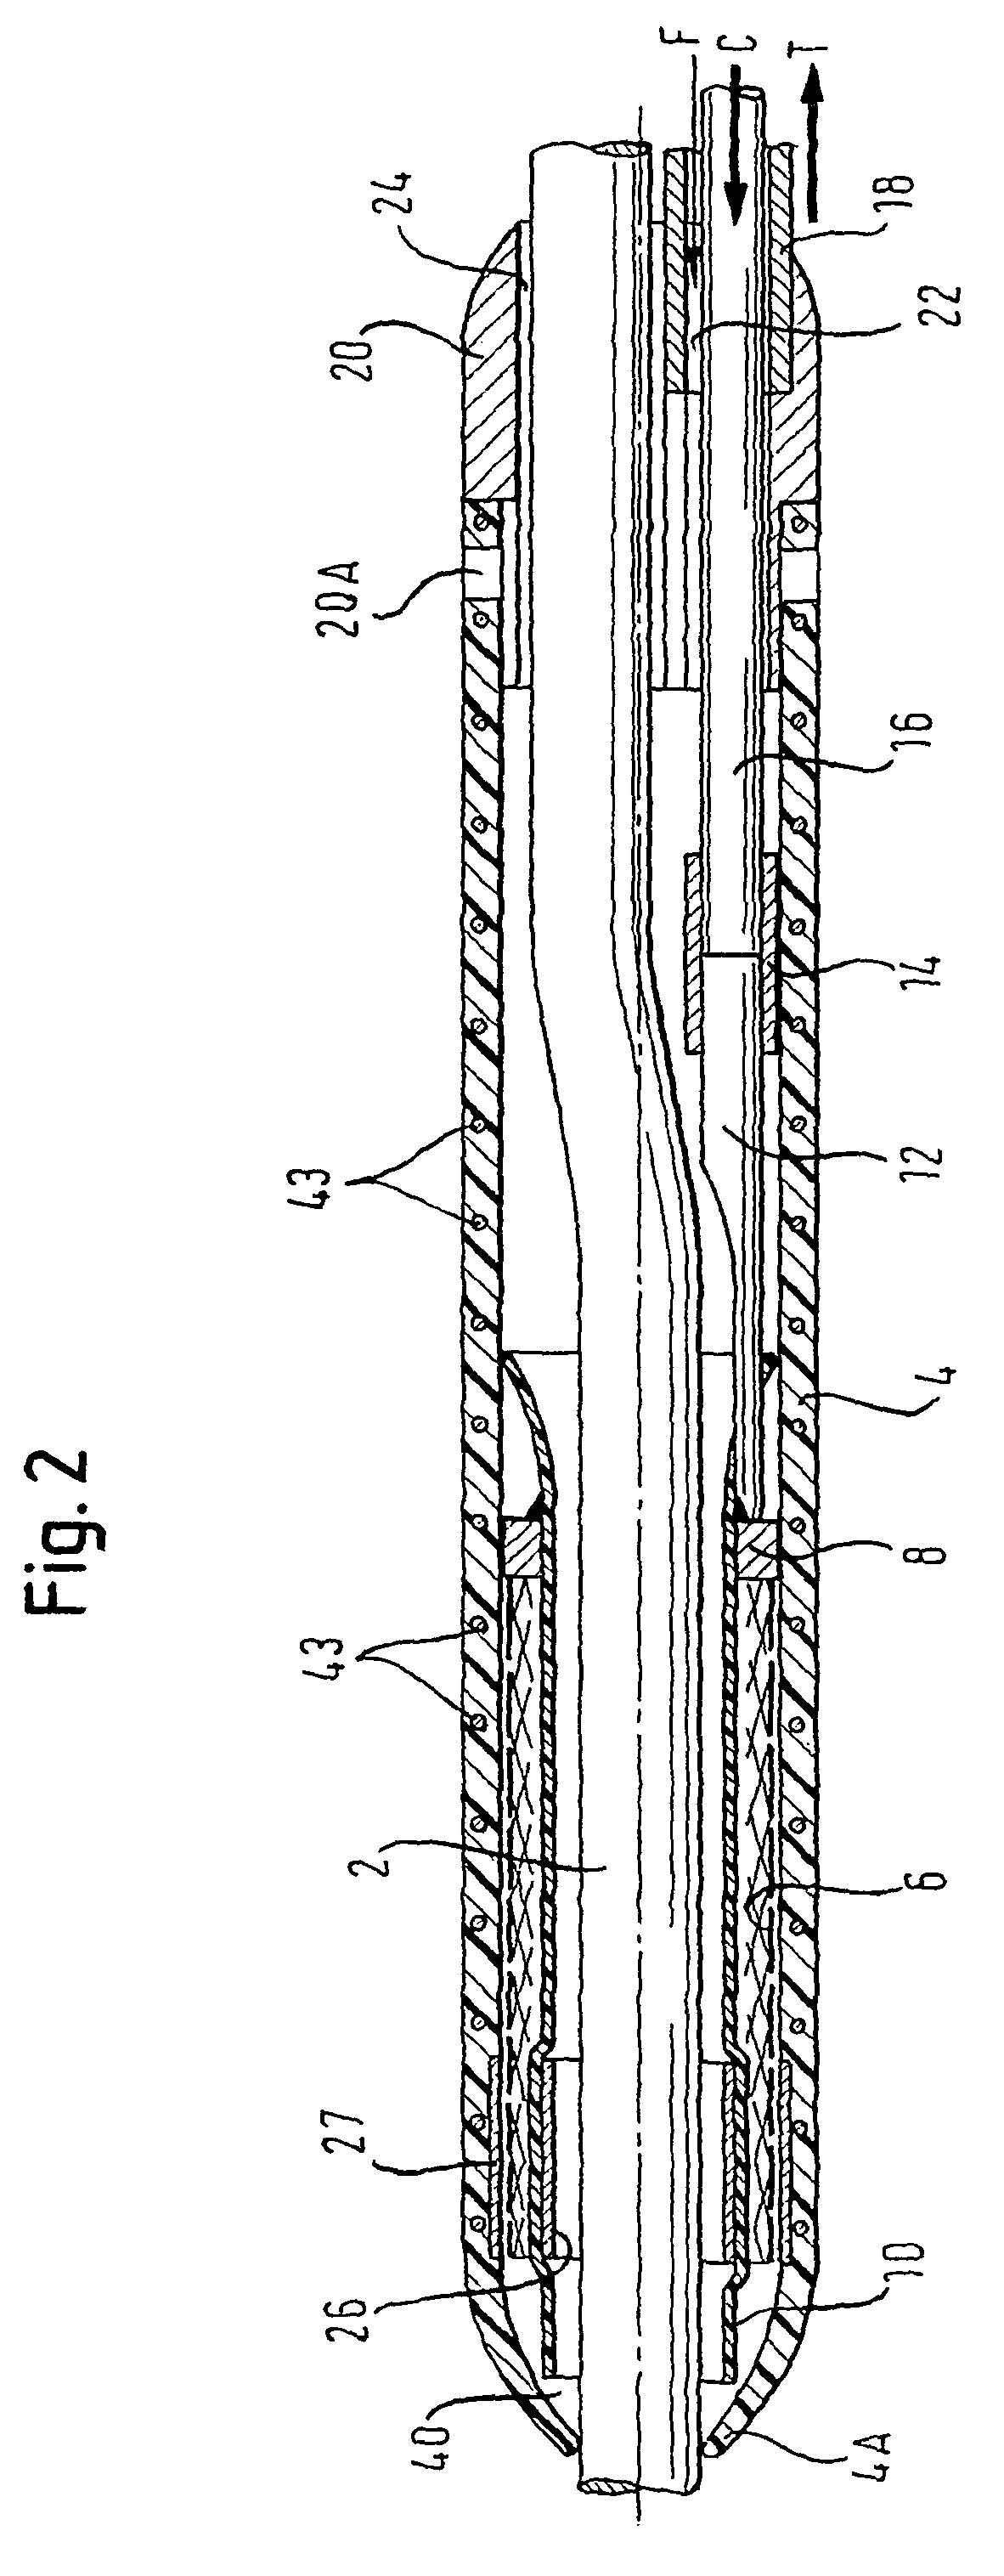 Delivery system having a rapid pusher assembly for self-expanding stent, and stent exchange configuration